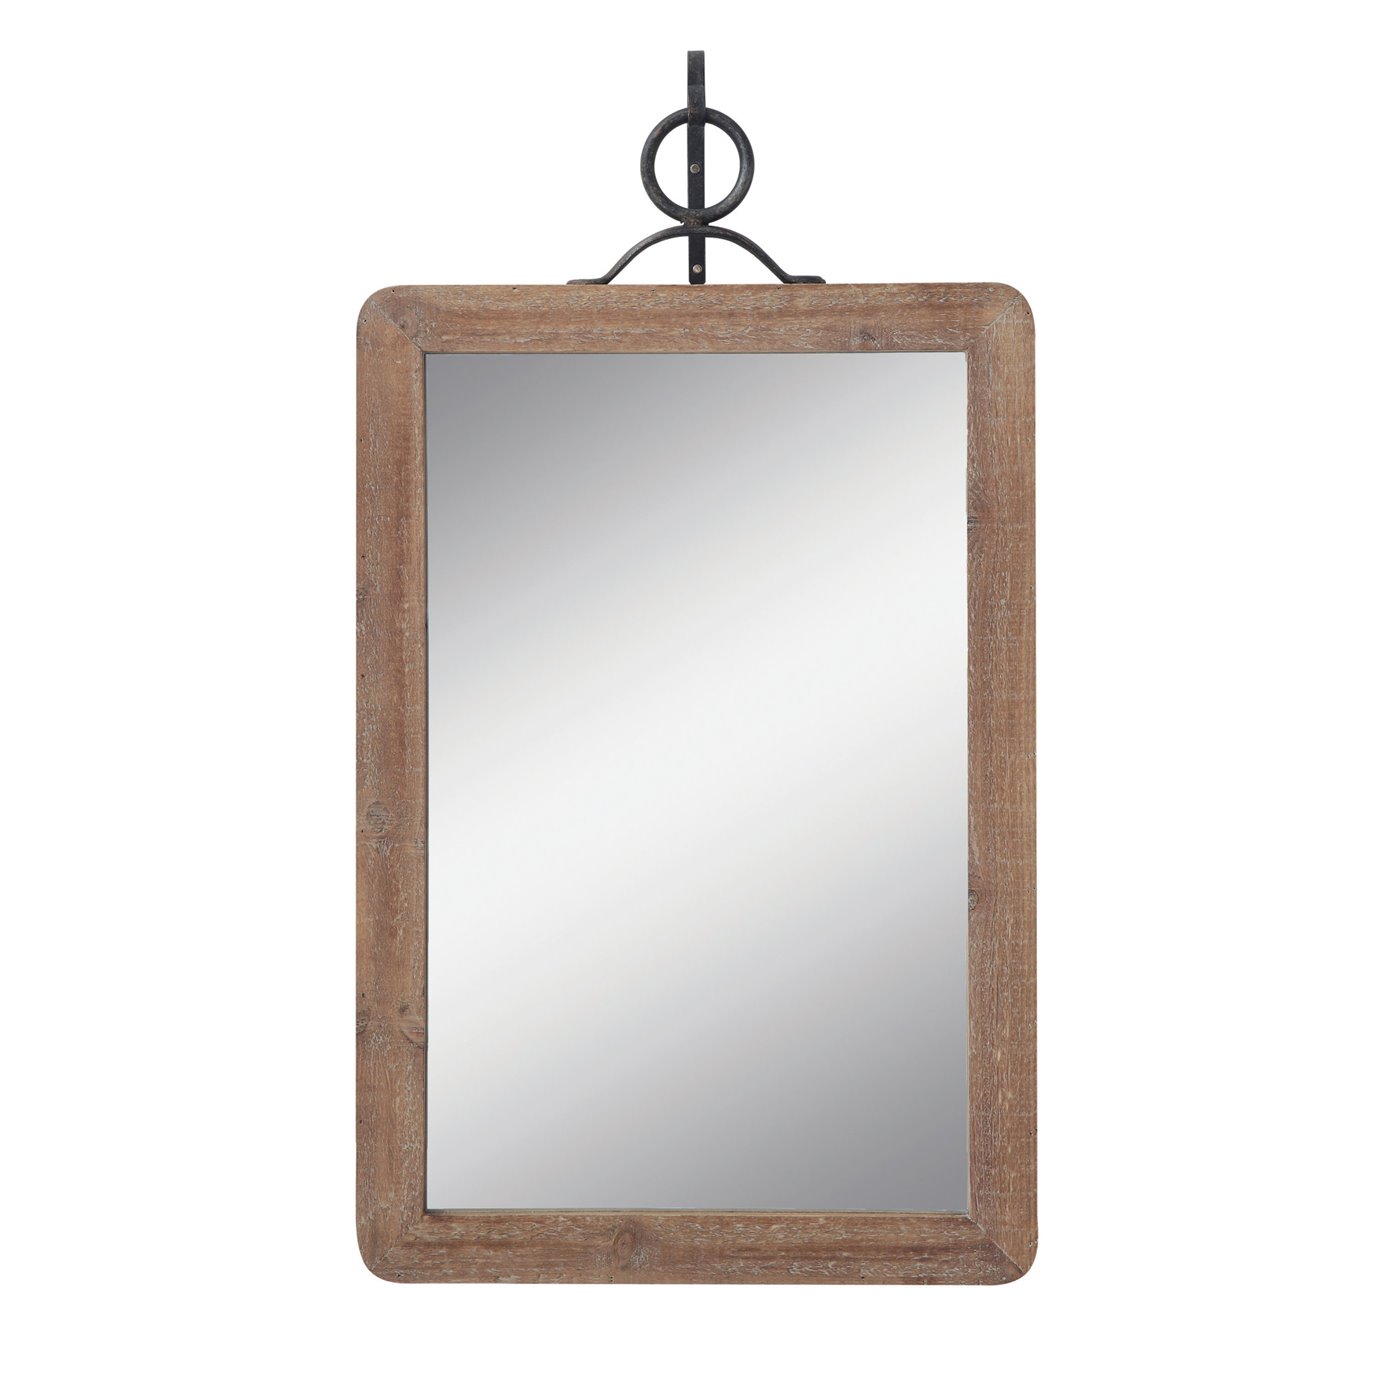 Large Wood Framed Rectangle Wall Mirror with Black Metal Hanging Bracket (Set of 2 Pieces)